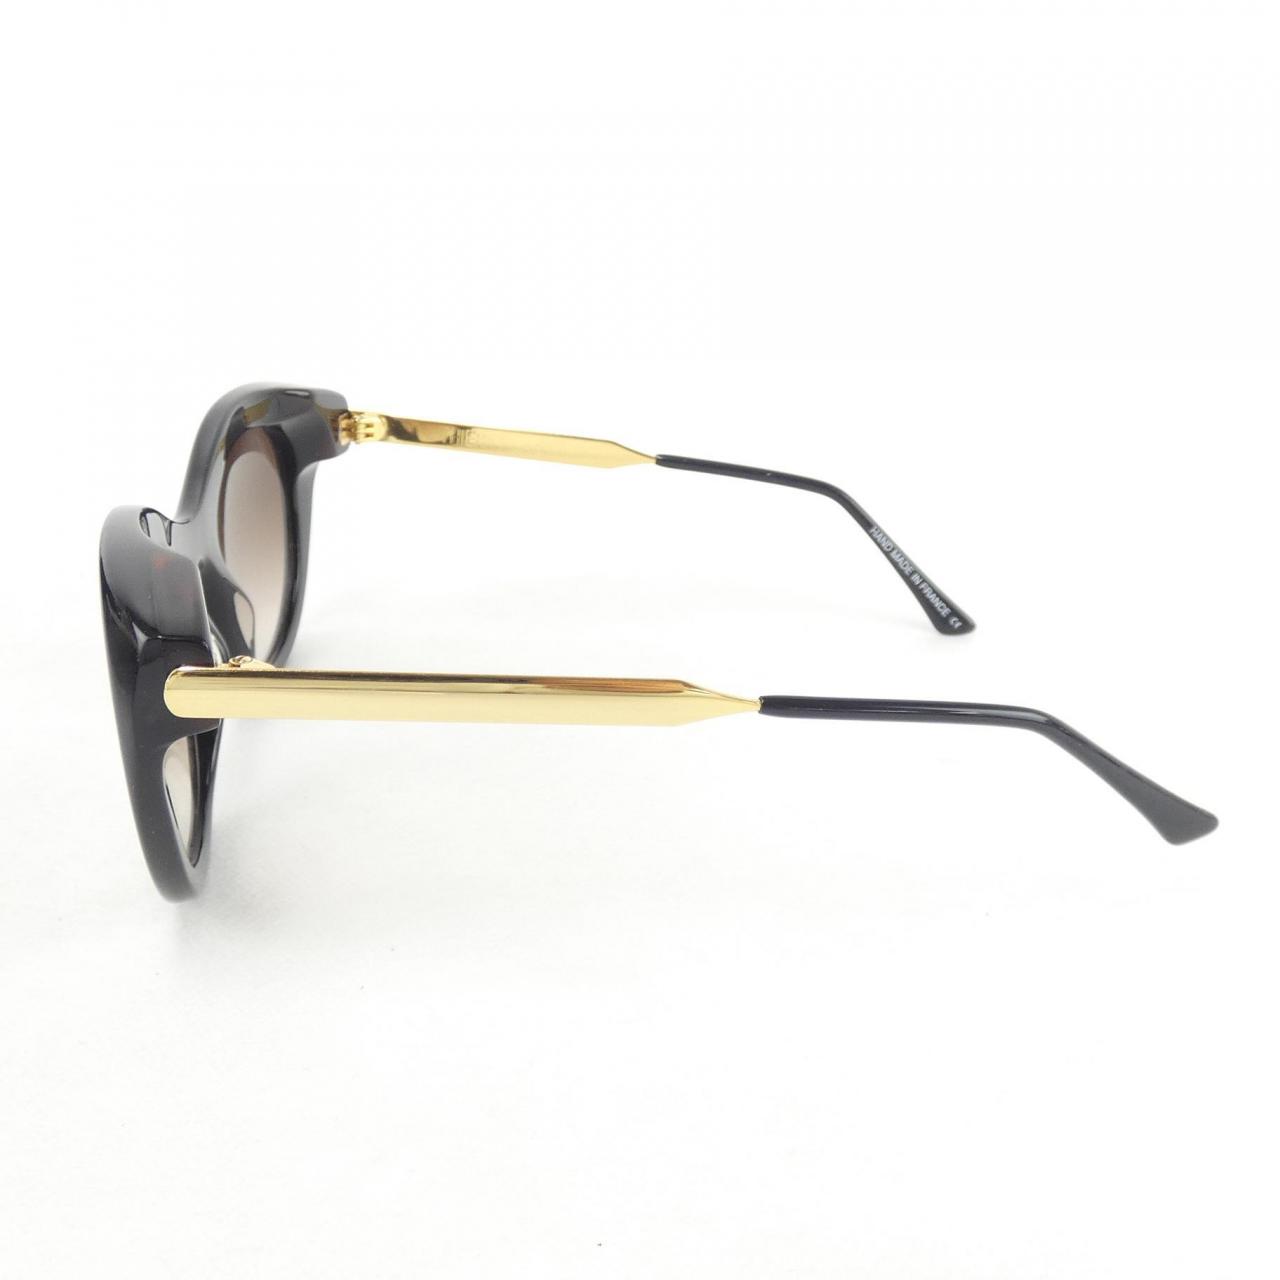 THIERRY LASRY POETRY SUNGLASSES